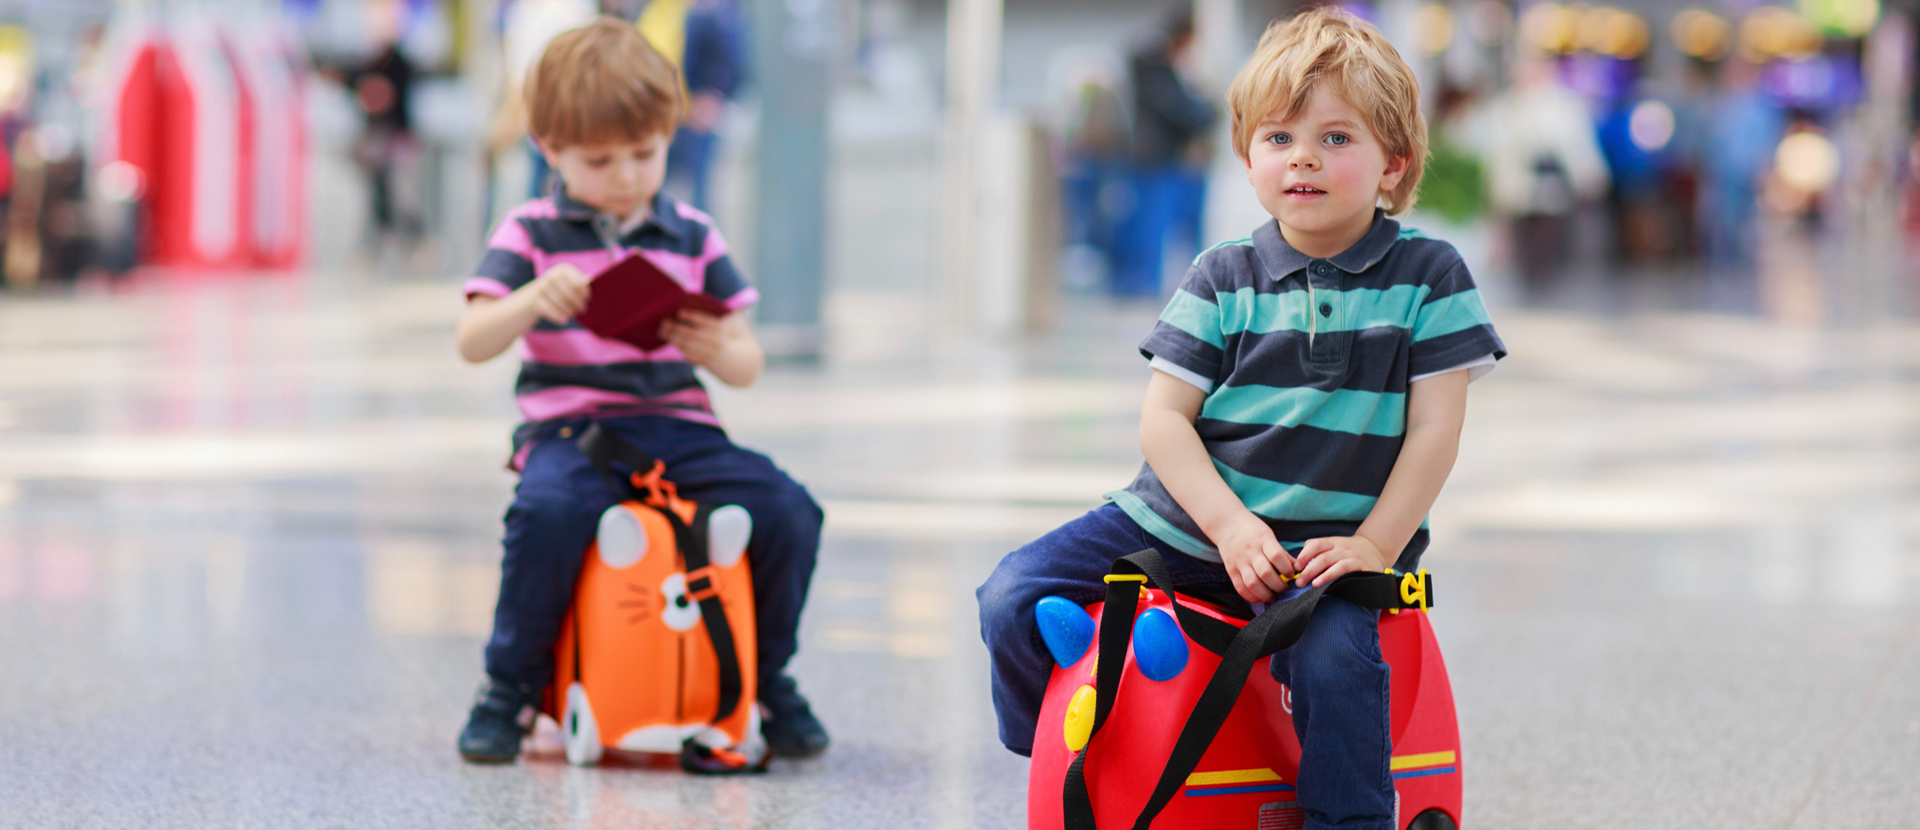 Traveling with Minor Children